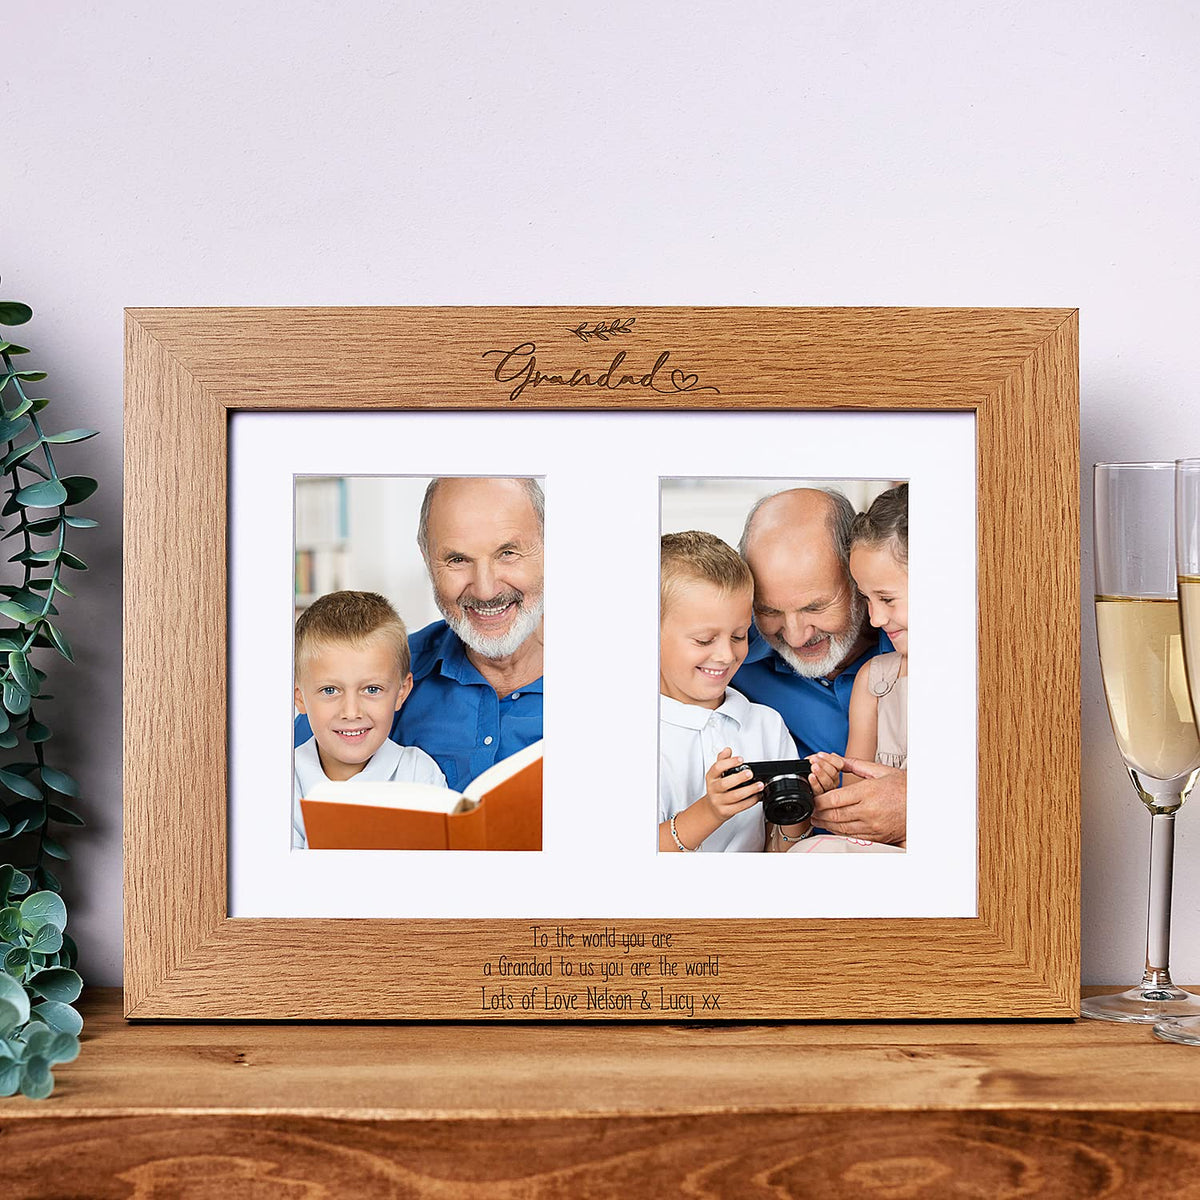 Personalised Grandad Wooden Double Photo Frame Gift Portrait